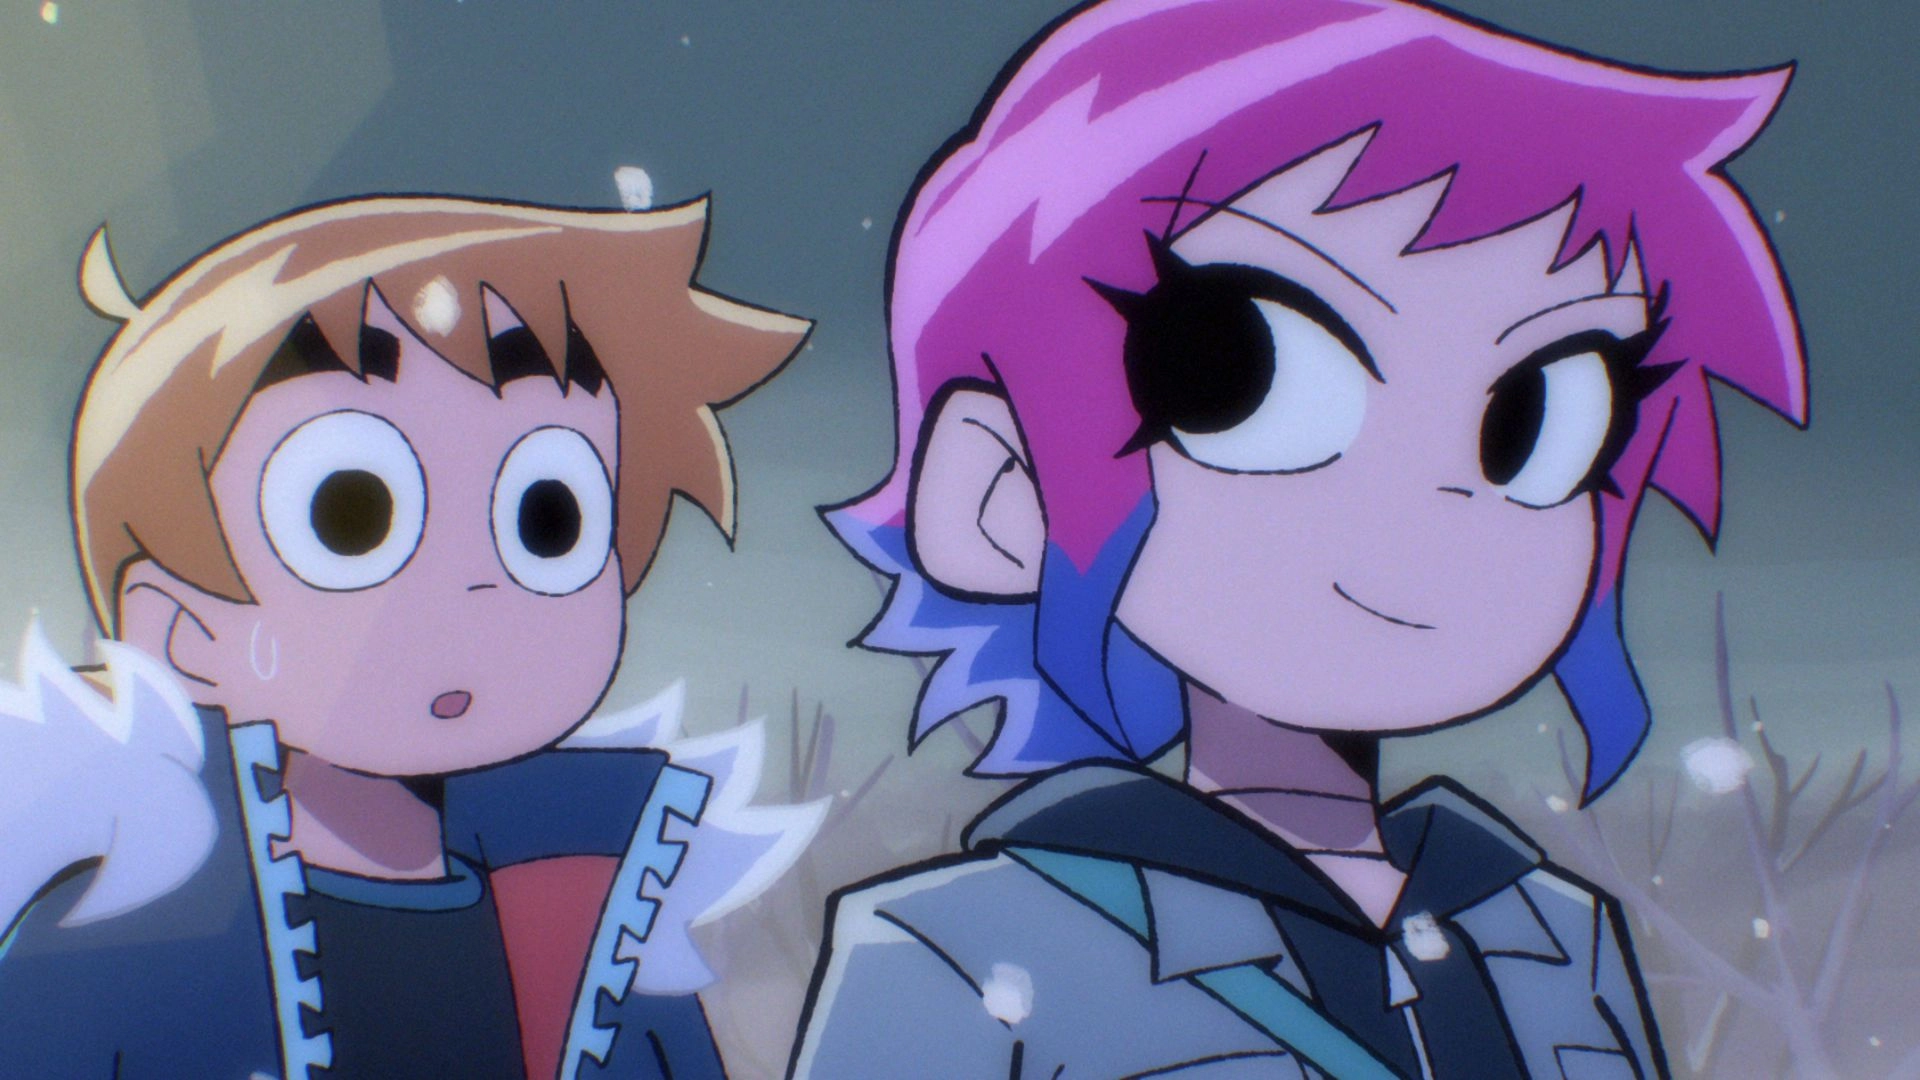 Bryan O'Malley's Initial Rejection of Scott Pilgrim Anime